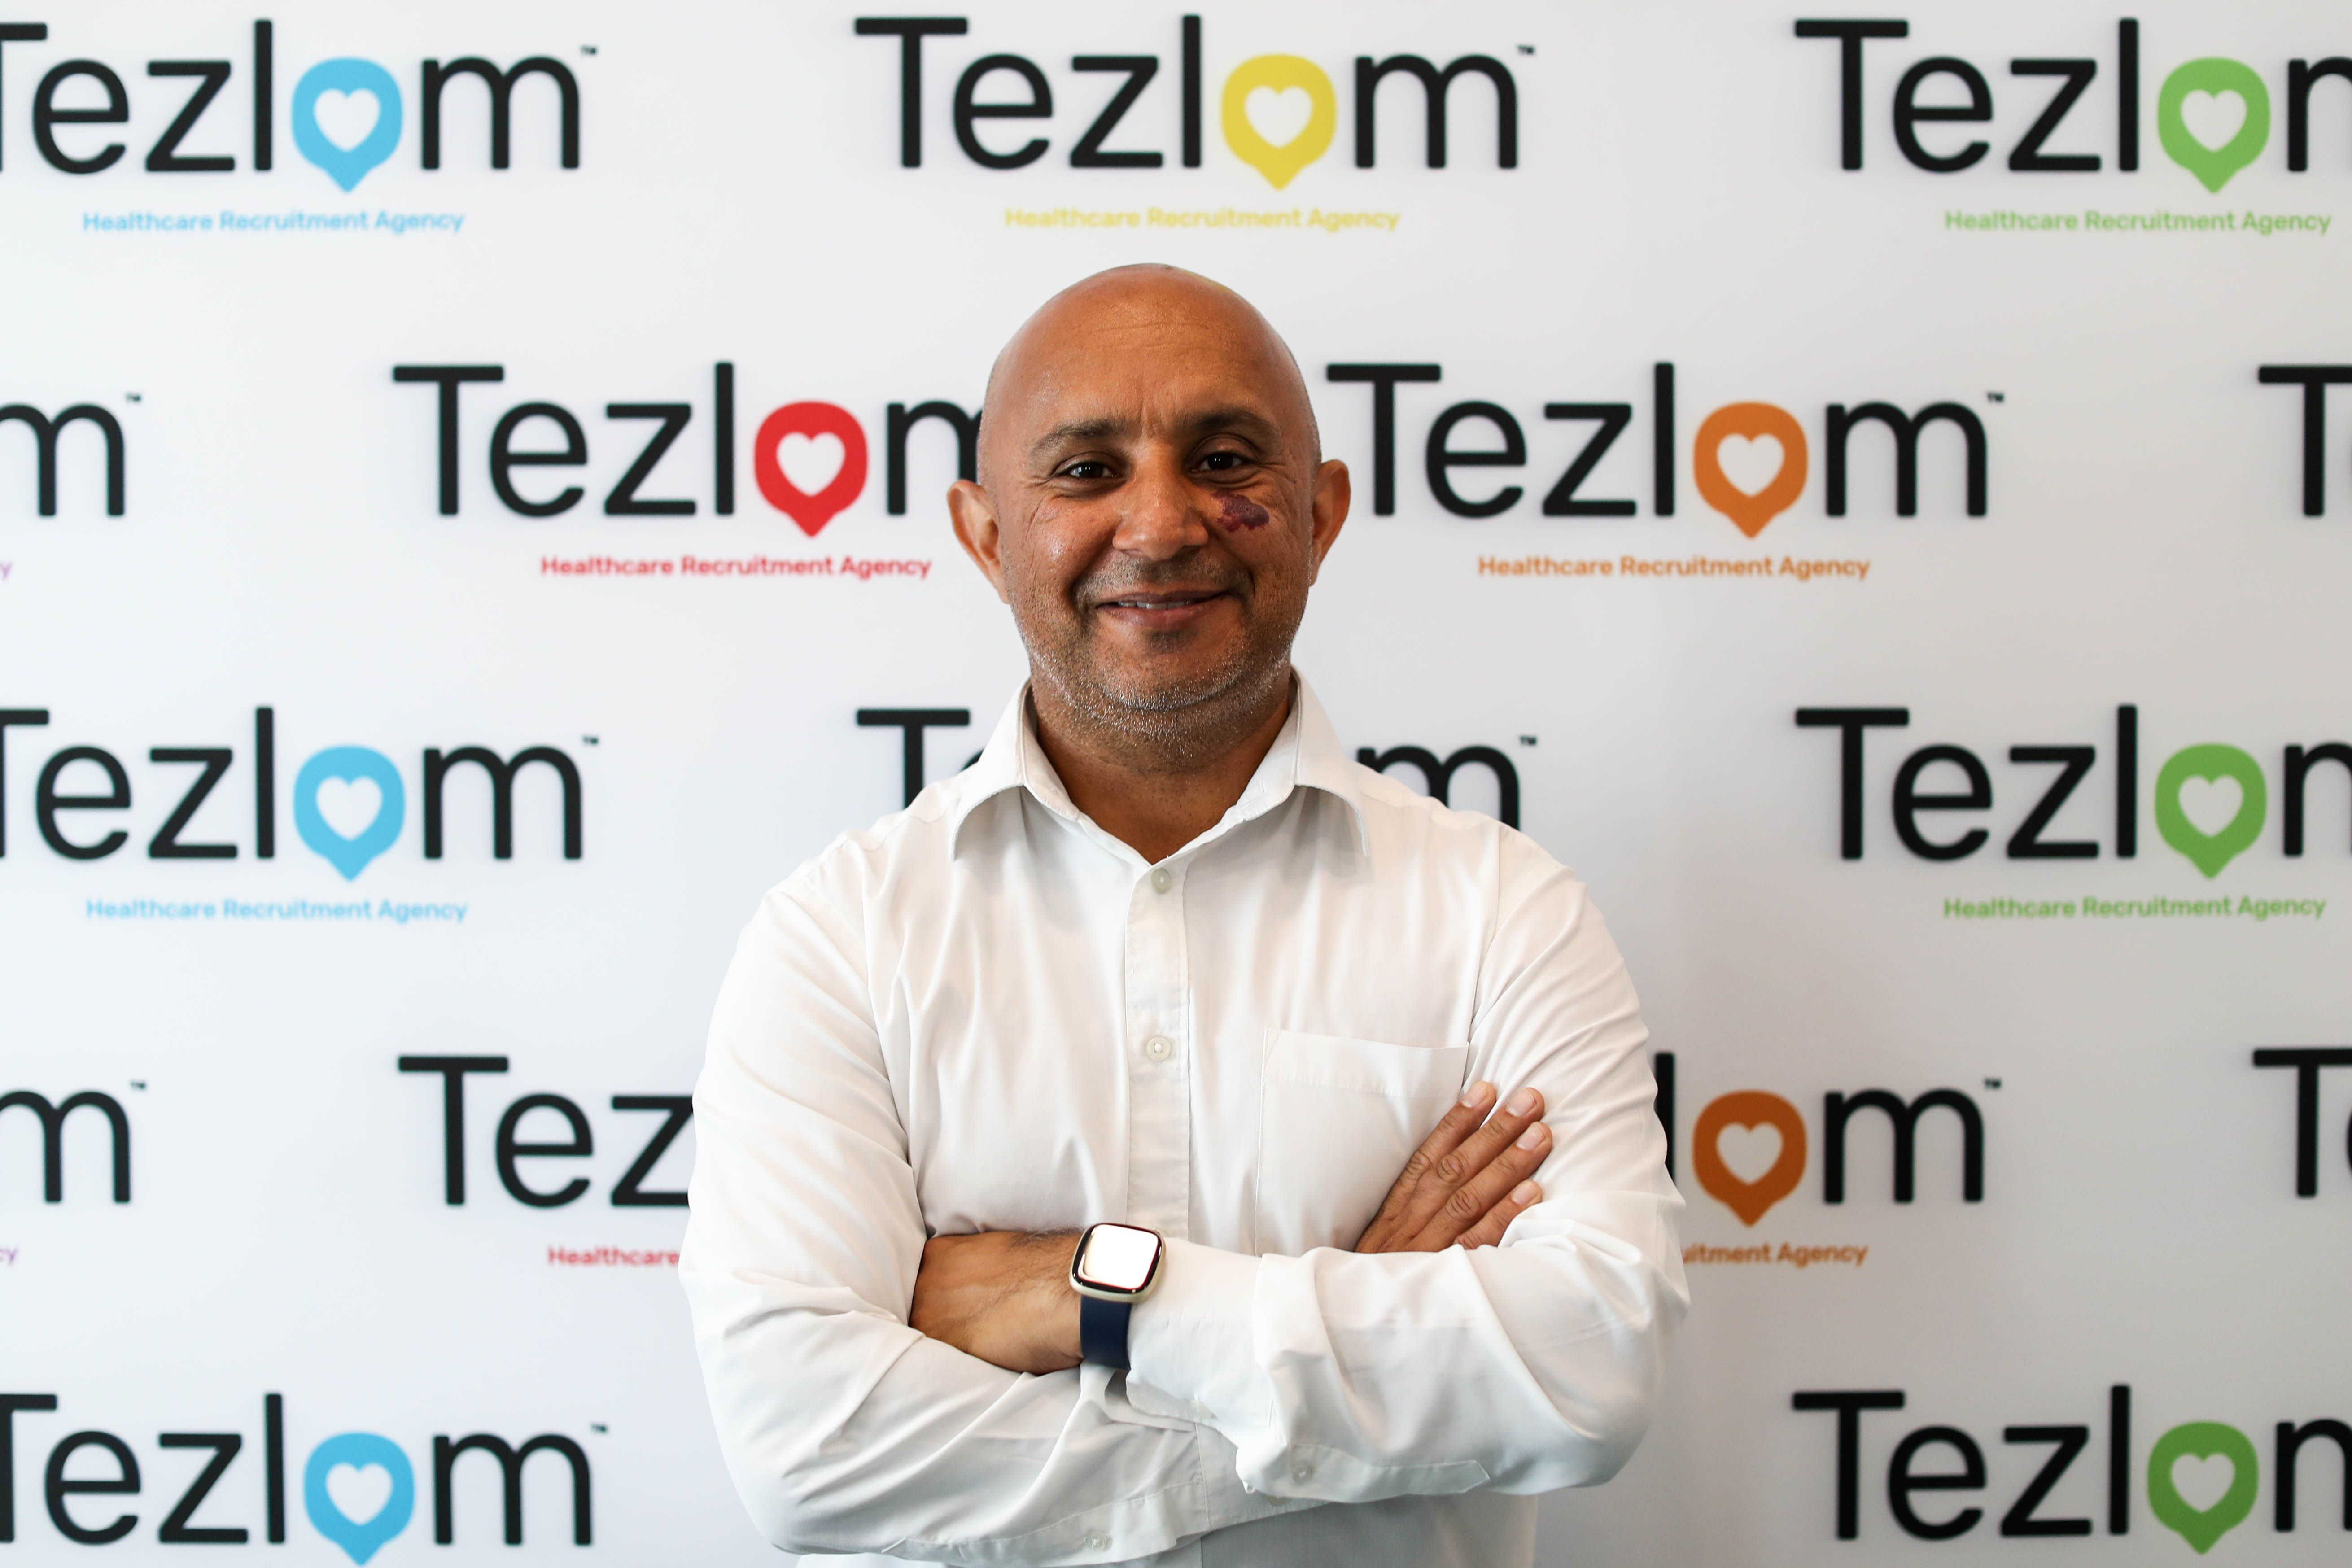 9 Years as a Tezlom Franchisee